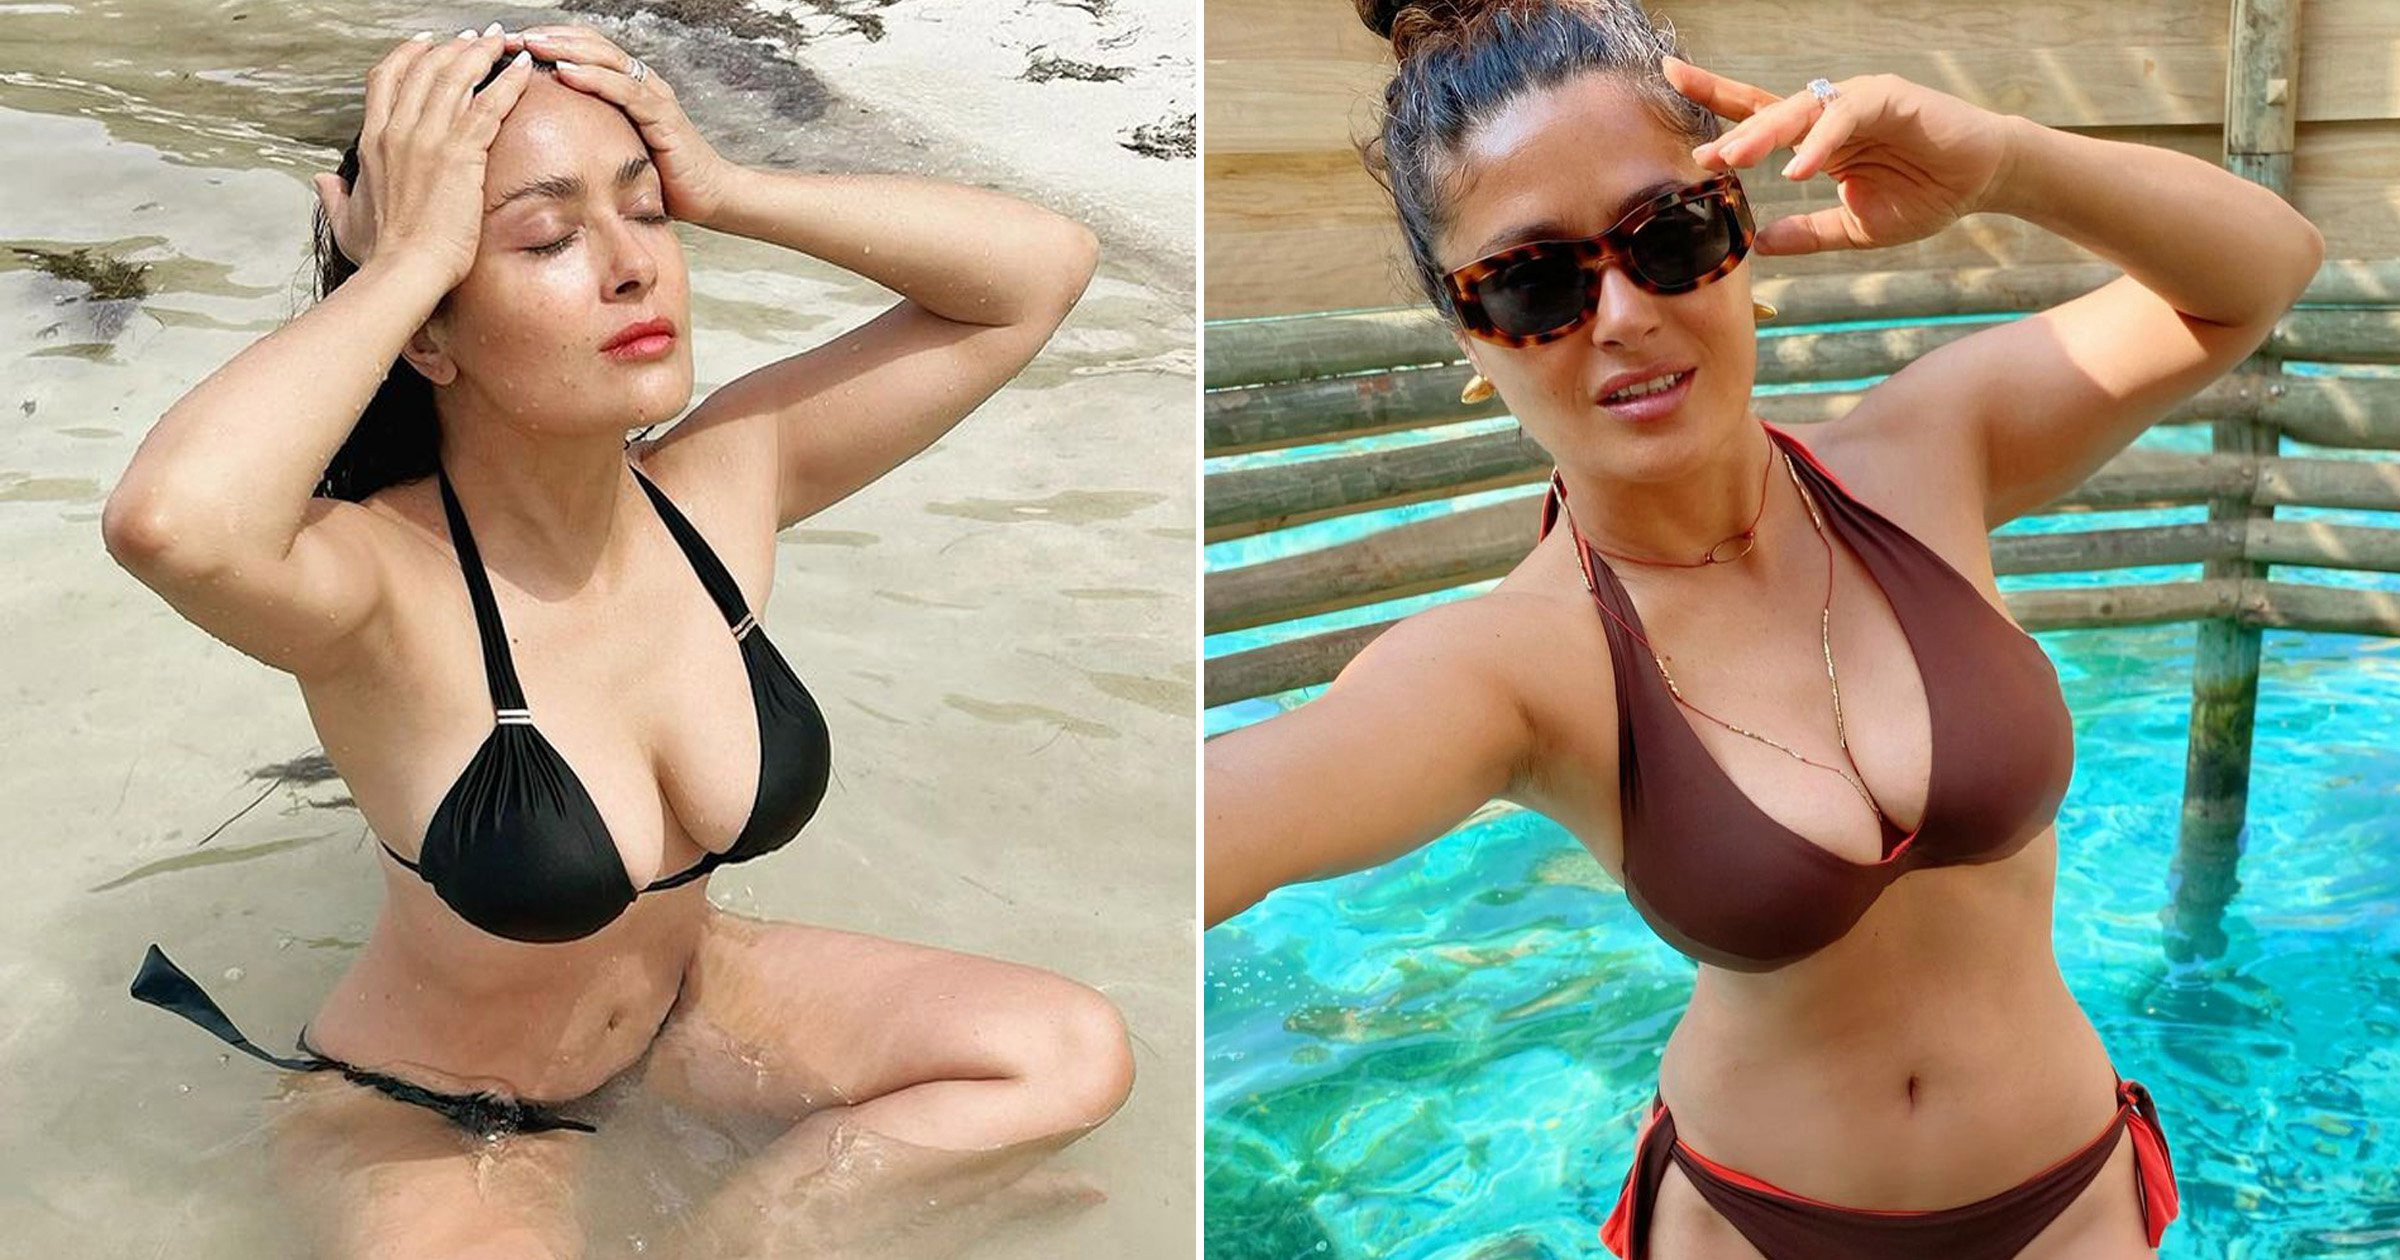 Salma Hayek has ‘no shame’ in her bikini snaps: ‘I’m almost running out of them!’